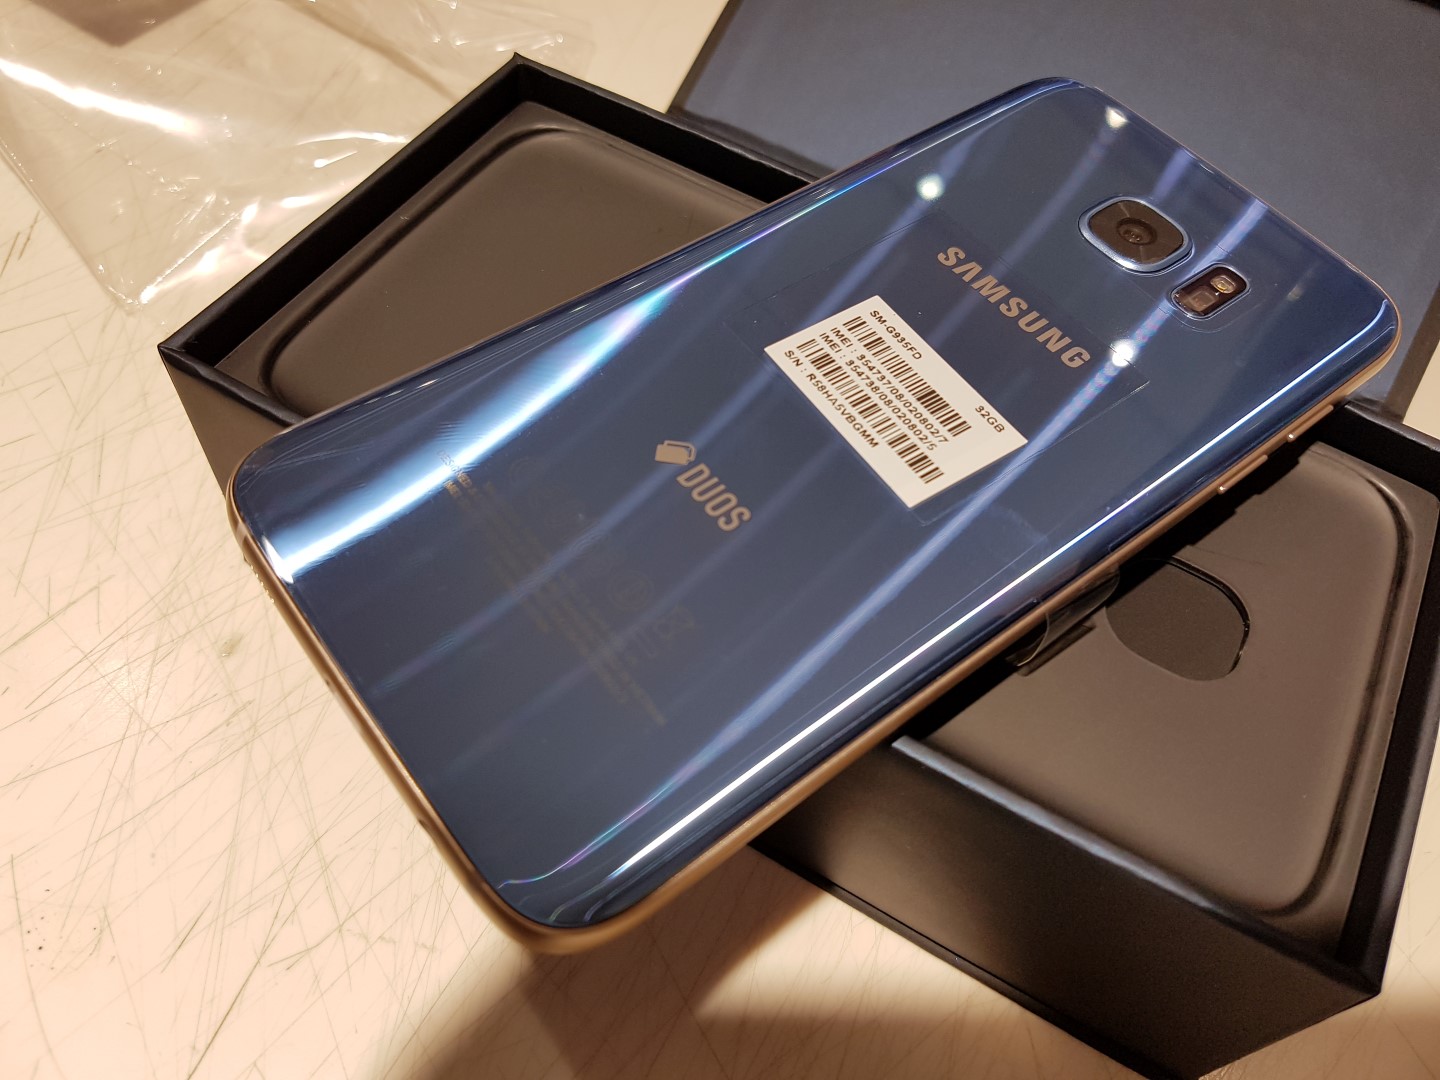 Check out these pictures of the Blue Coral Galaxy S7 edge ... - 1440 x 1080 jpeg 288kB